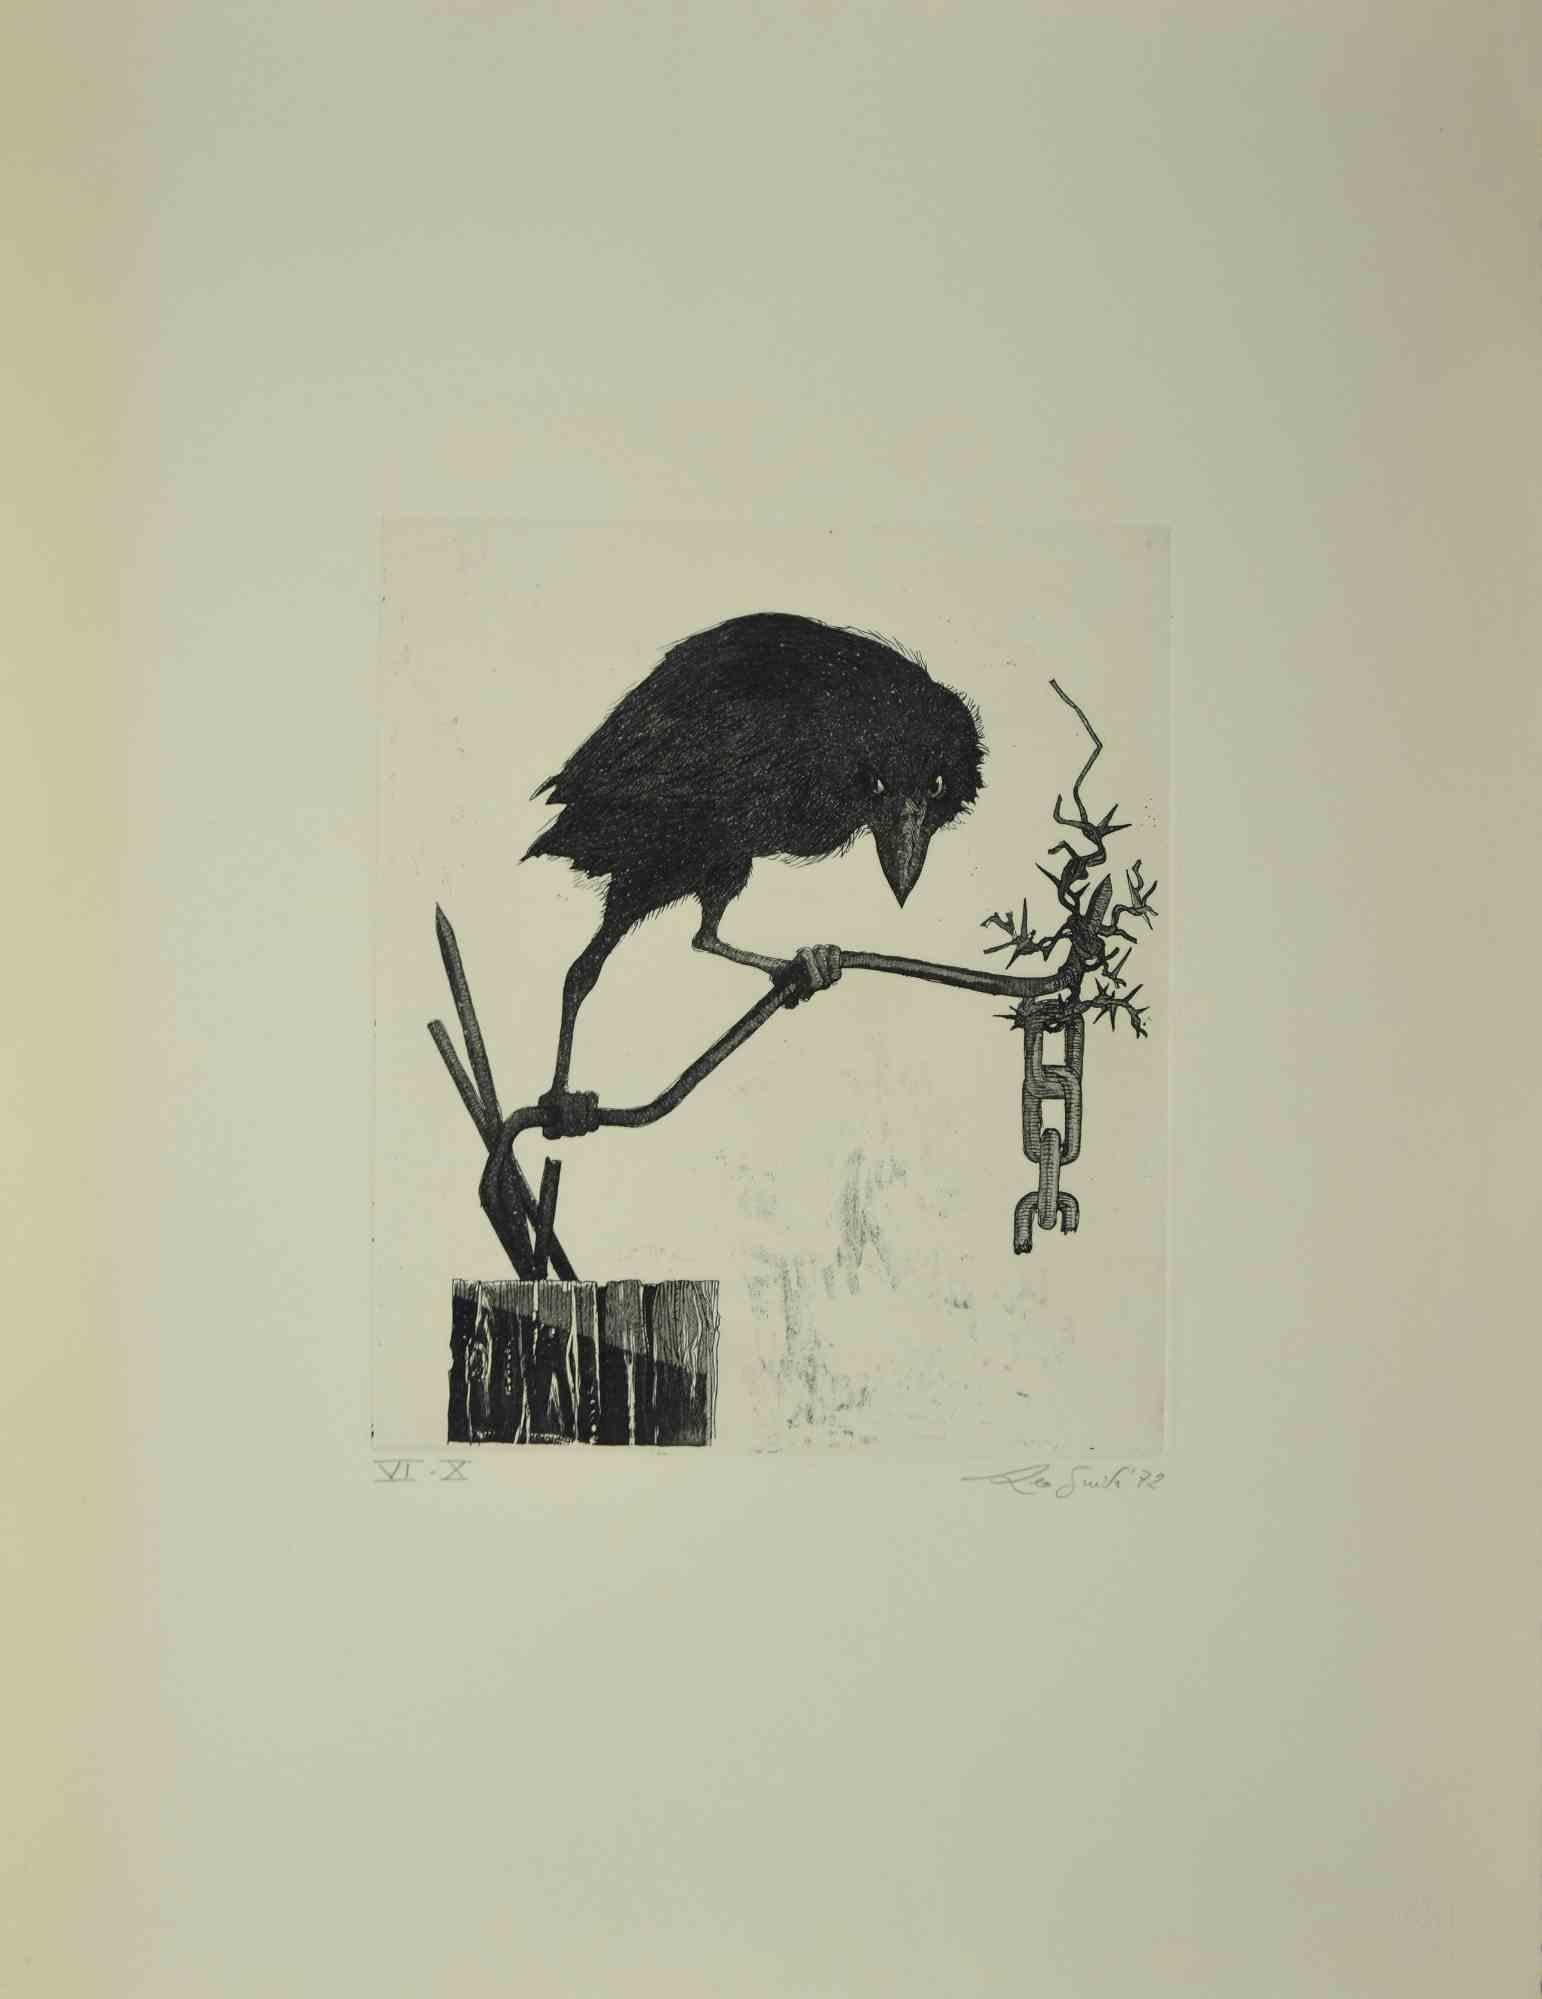 The crow is an original etching print realized by Leo Guida in 1972.

From the edition of 10 prints.

Guter Zustand.

Leo Guida  (1992 - 2017). Sensitive to current issues, artistic movements and historical techniques, Leo Guida has been able to